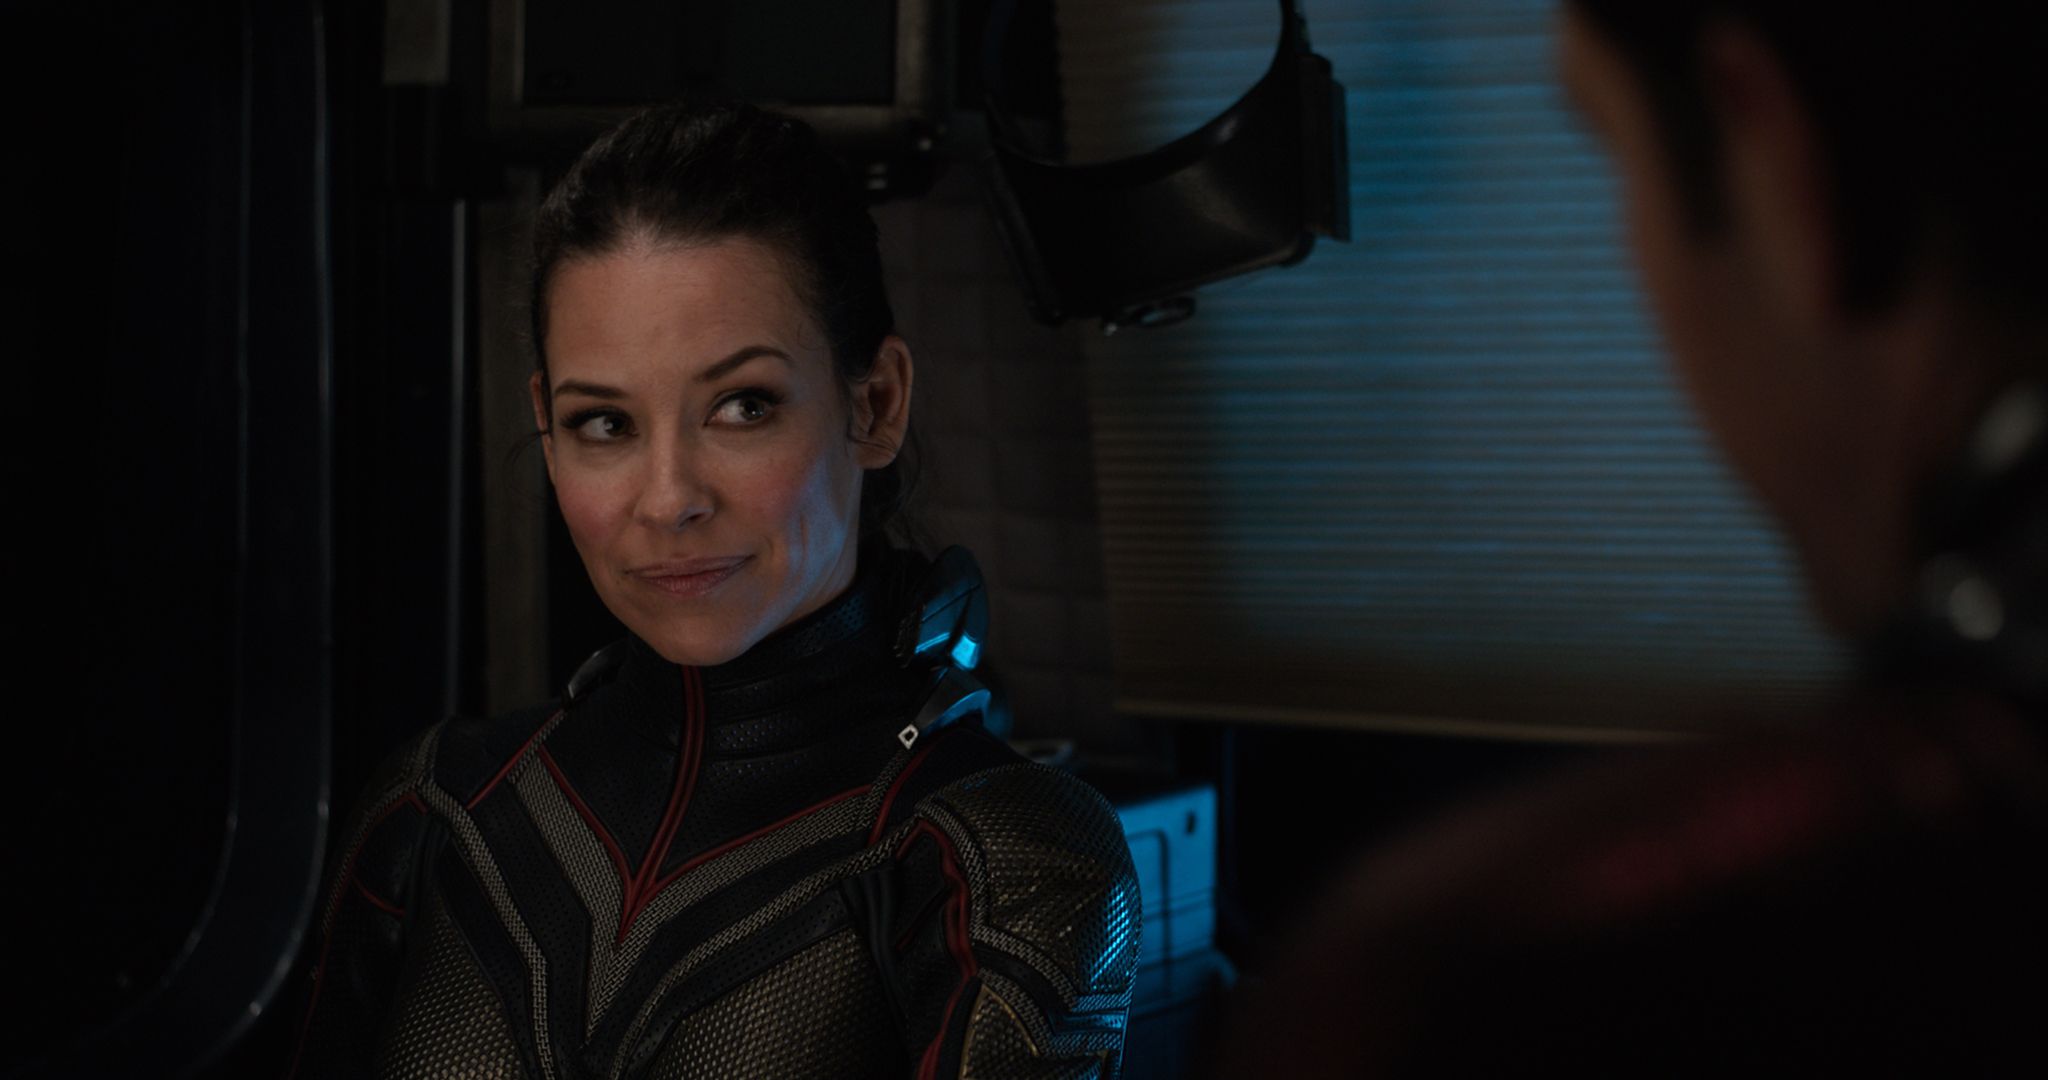 Ant Man And The Wasp High Res Image. Cosmic Book News